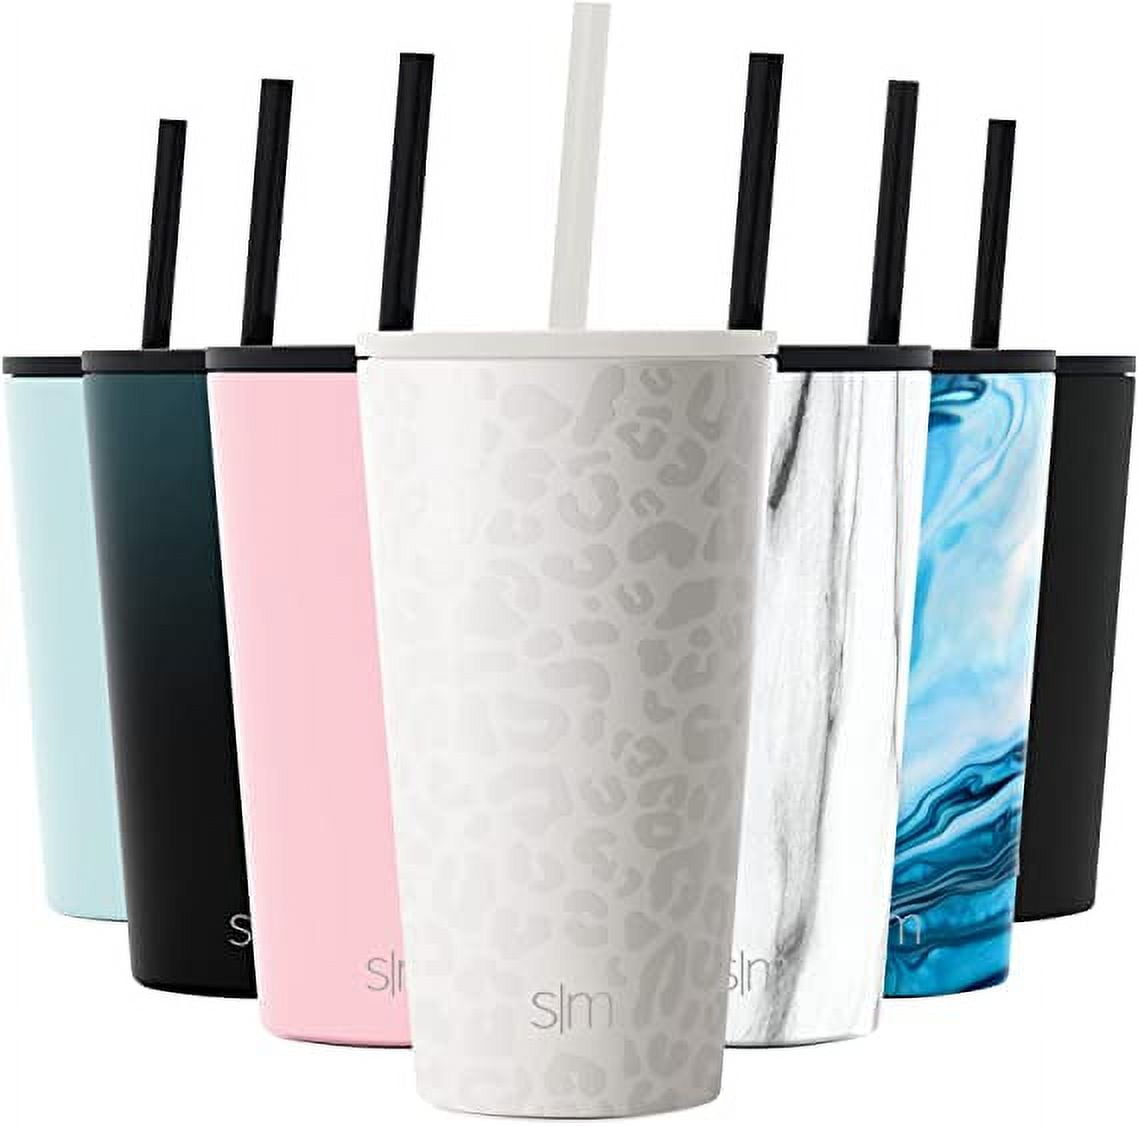 Customized Lagom Tumblers with Stainless Steel Straw (16 Oz